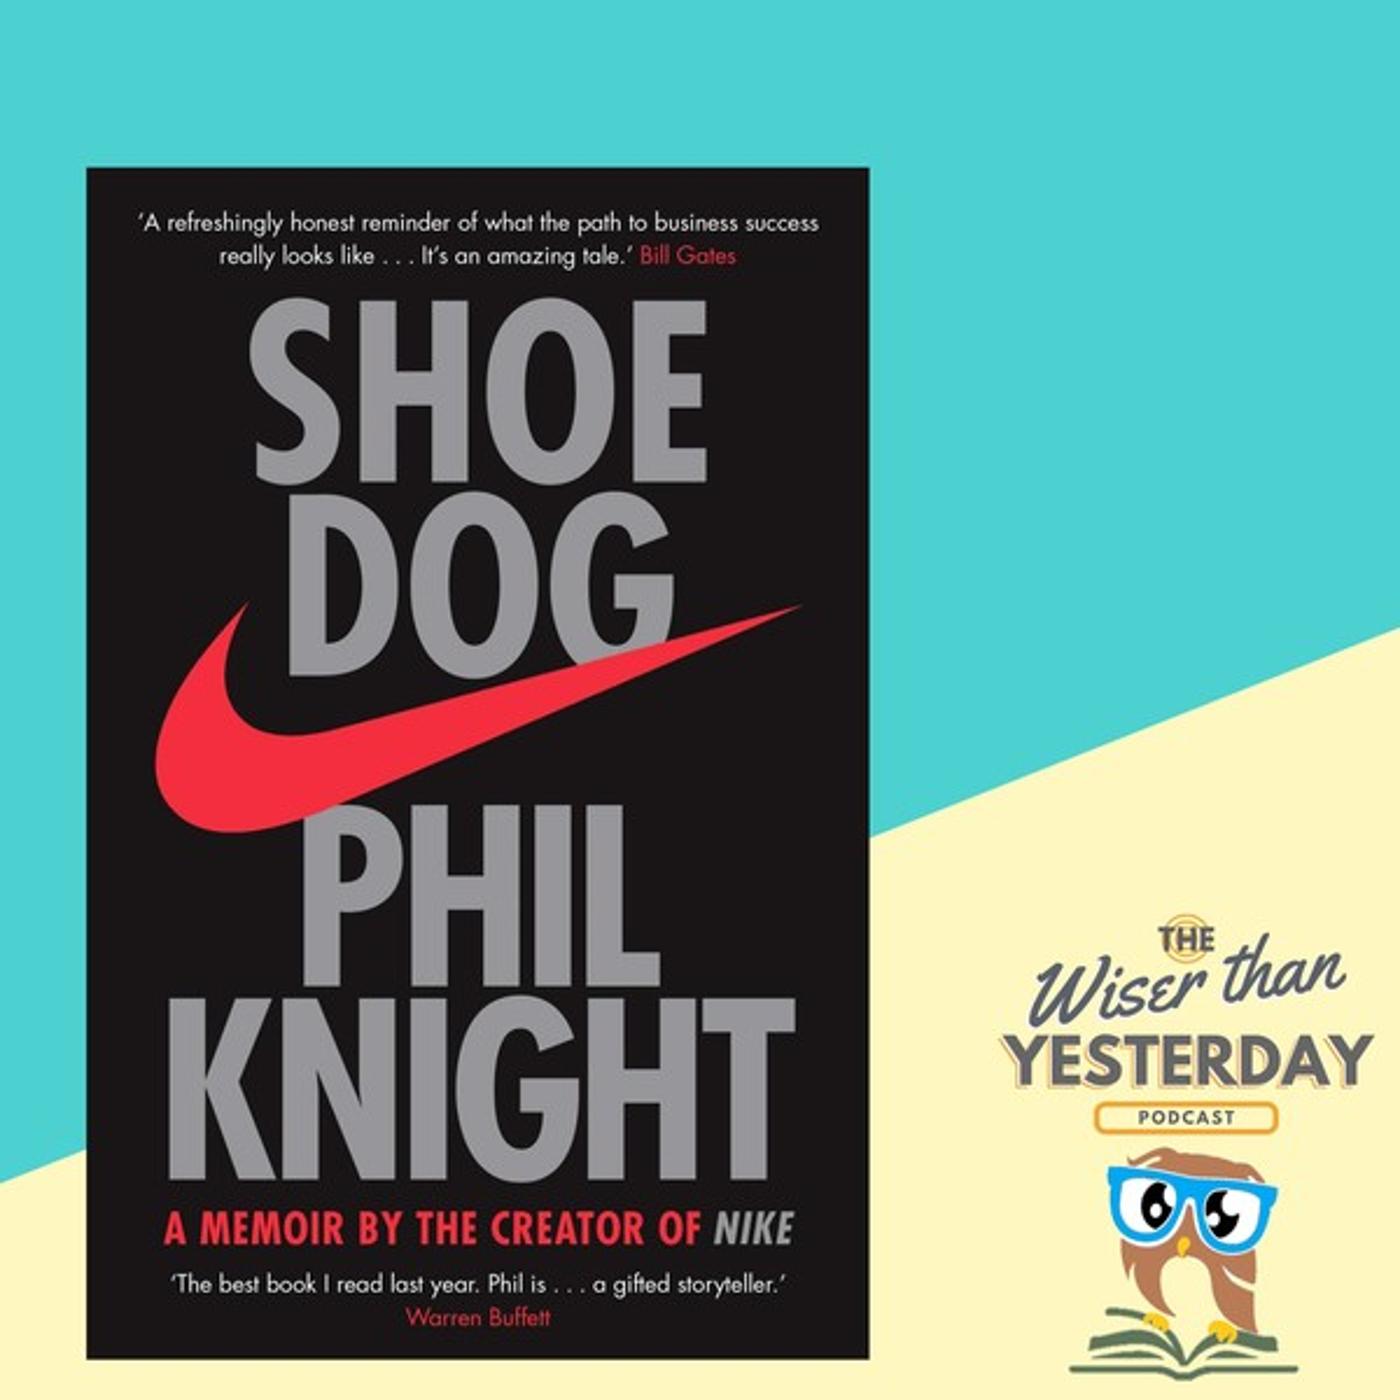 Business: Shoe Dog - Phil Knight - The story of Nike